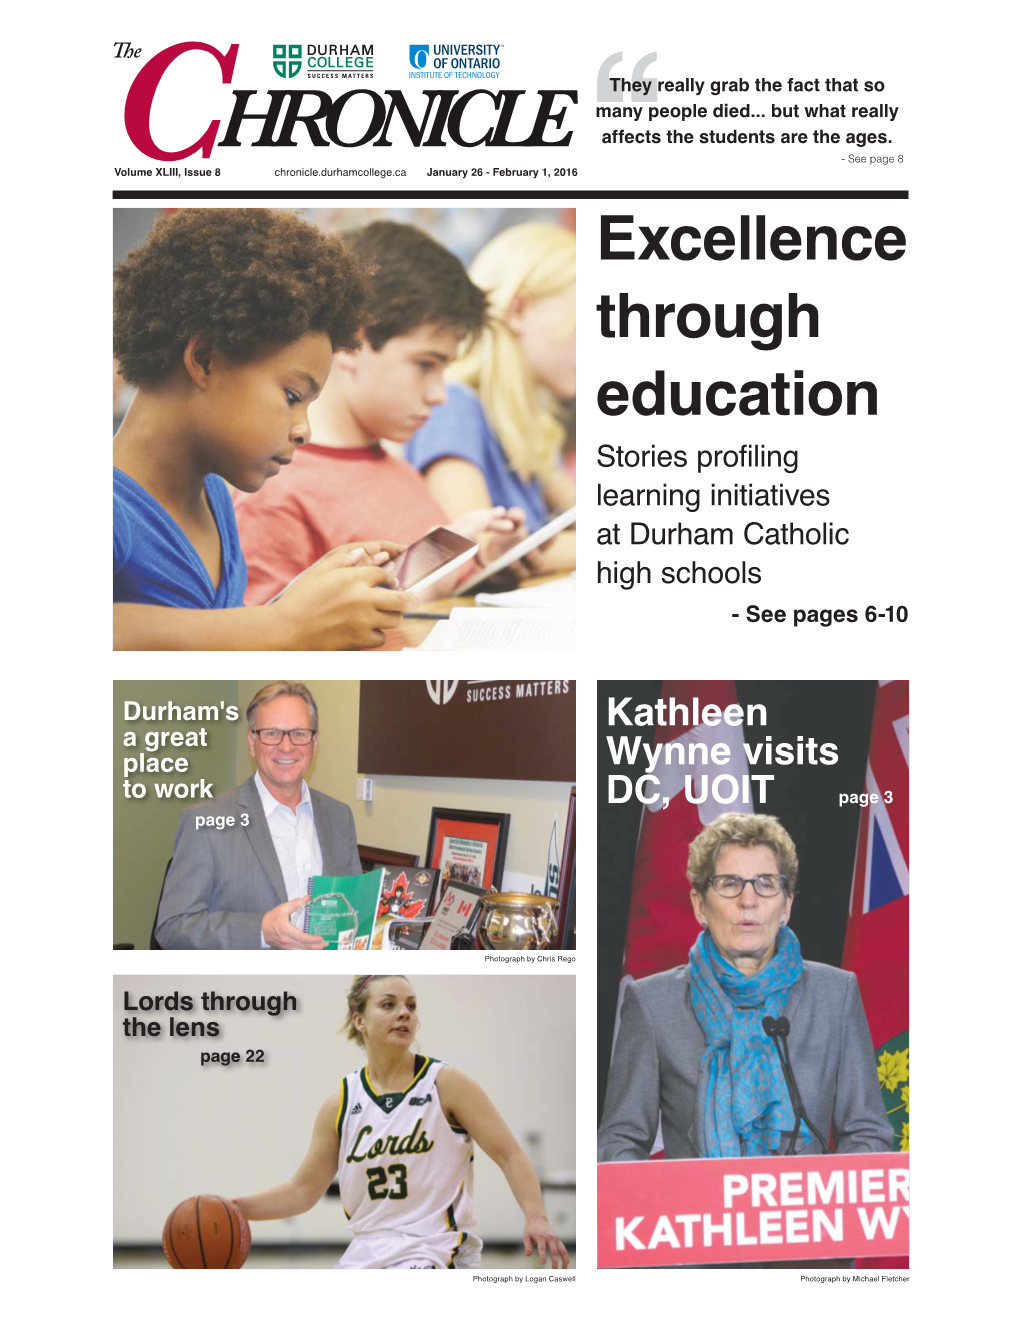 Excellence Through Education Stories Profiling Learning Initiatives at Durham Catholic High Schools - See Pages 6-10